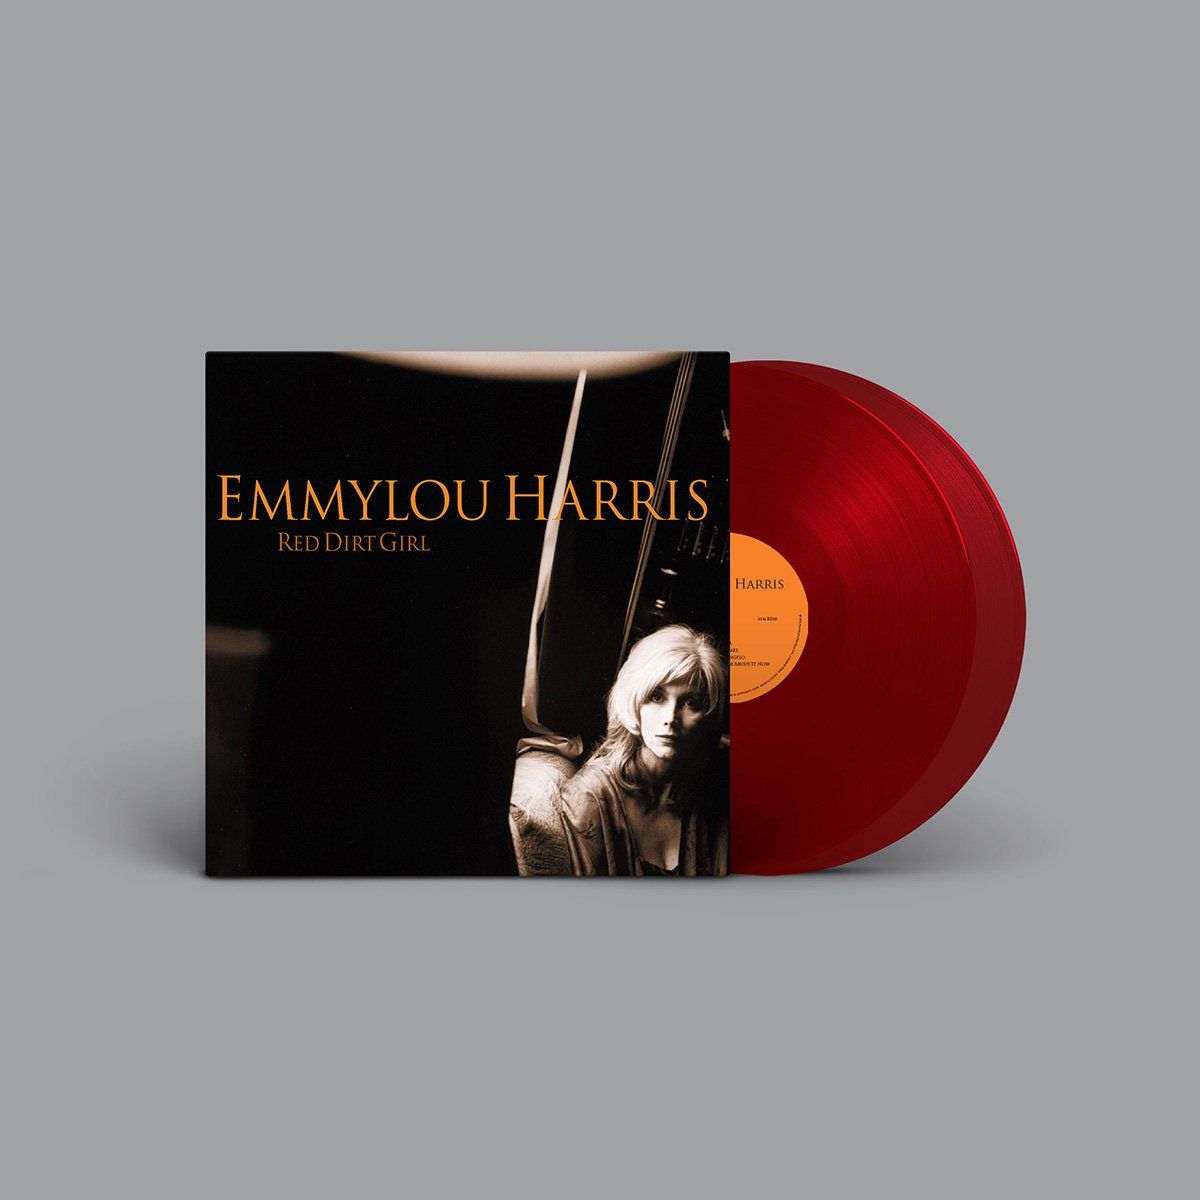 Emmylou Harris's Grammy-Winning Nonesuch Debut Album, "Red Dirt to Be Released on Red Vinyl on February 19, 2021